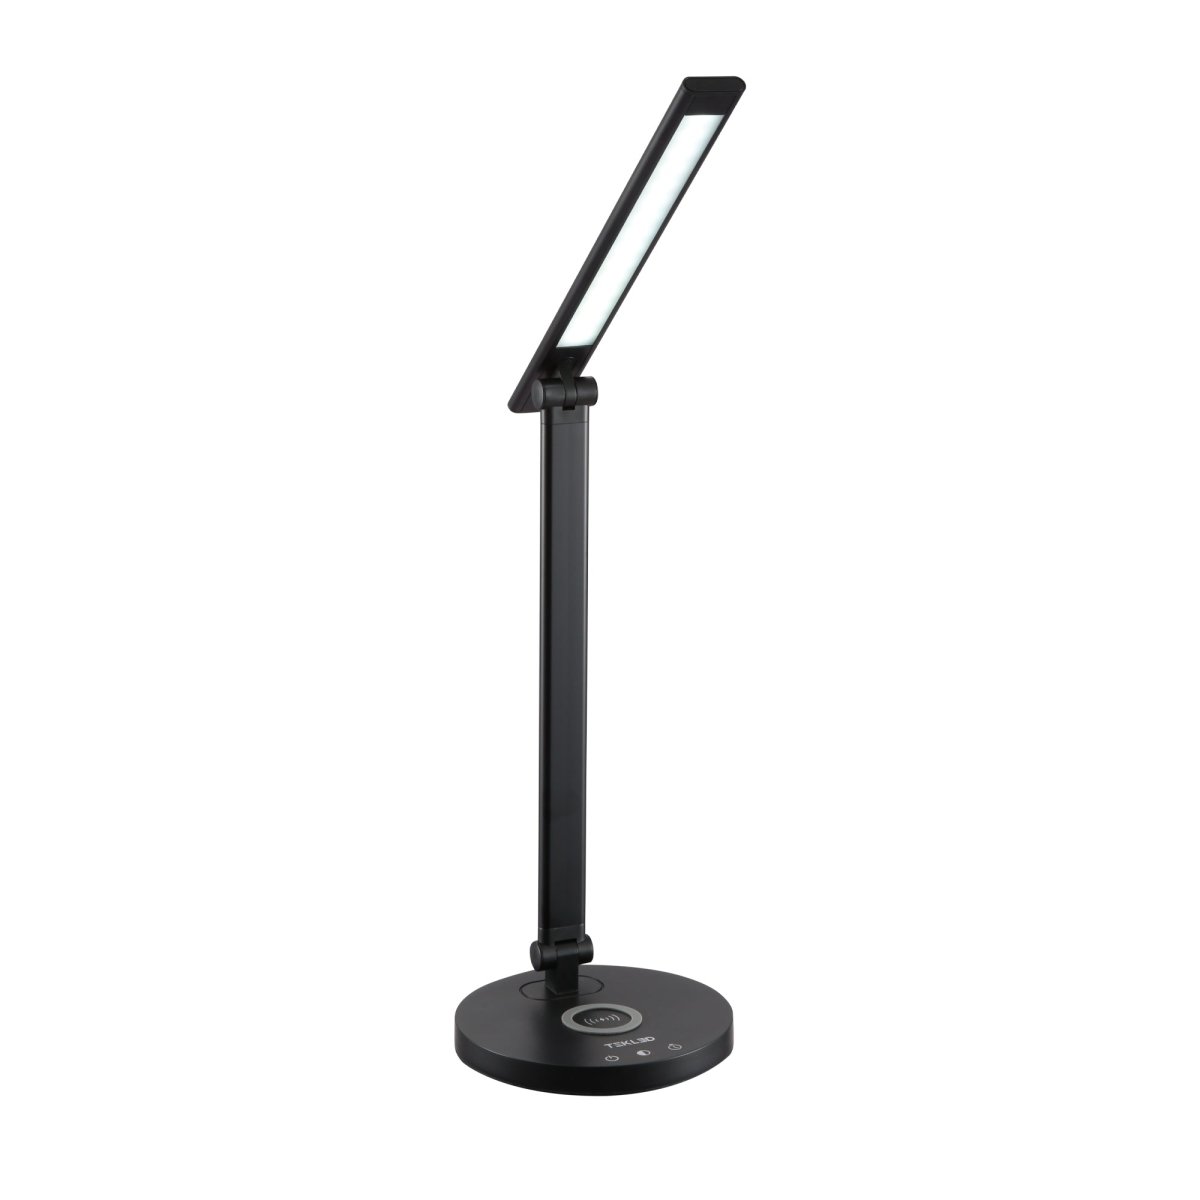 Main image of Lingo Silver Desk Light Dimmable and Colour Modes with Wireless Phone Charger | TEKLED 130-03626